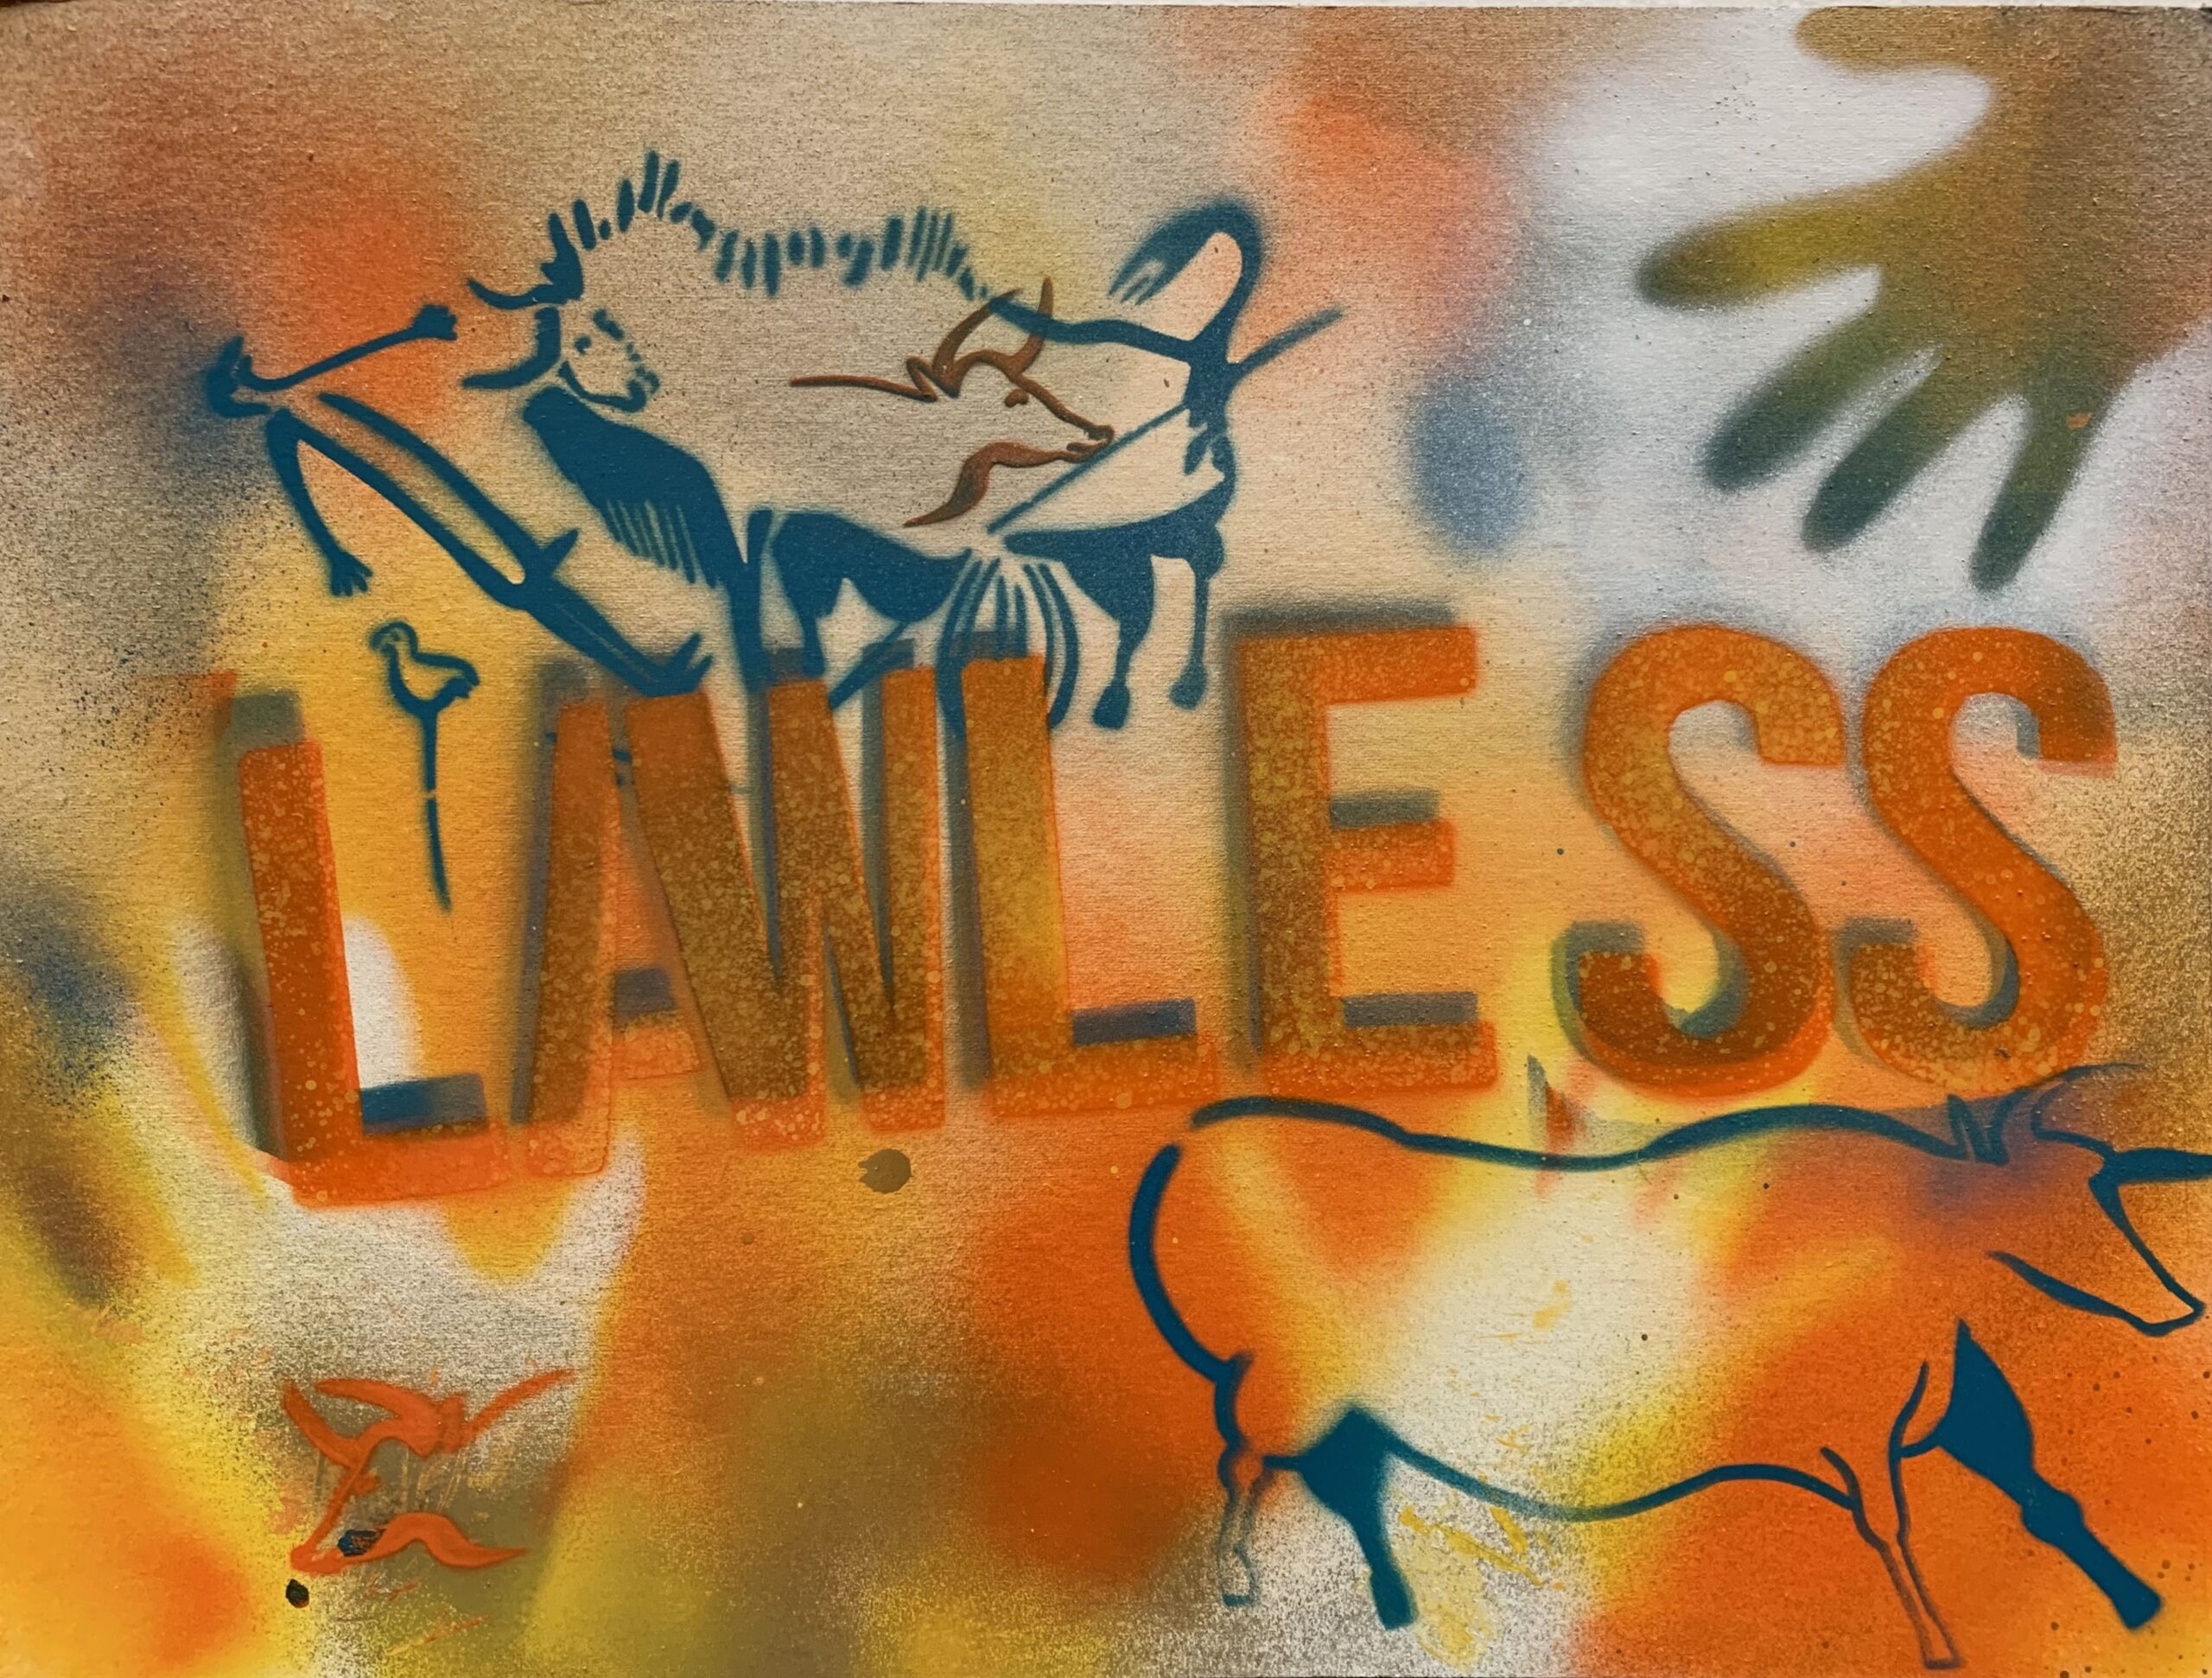 a sign that says lawless painted on a wall.